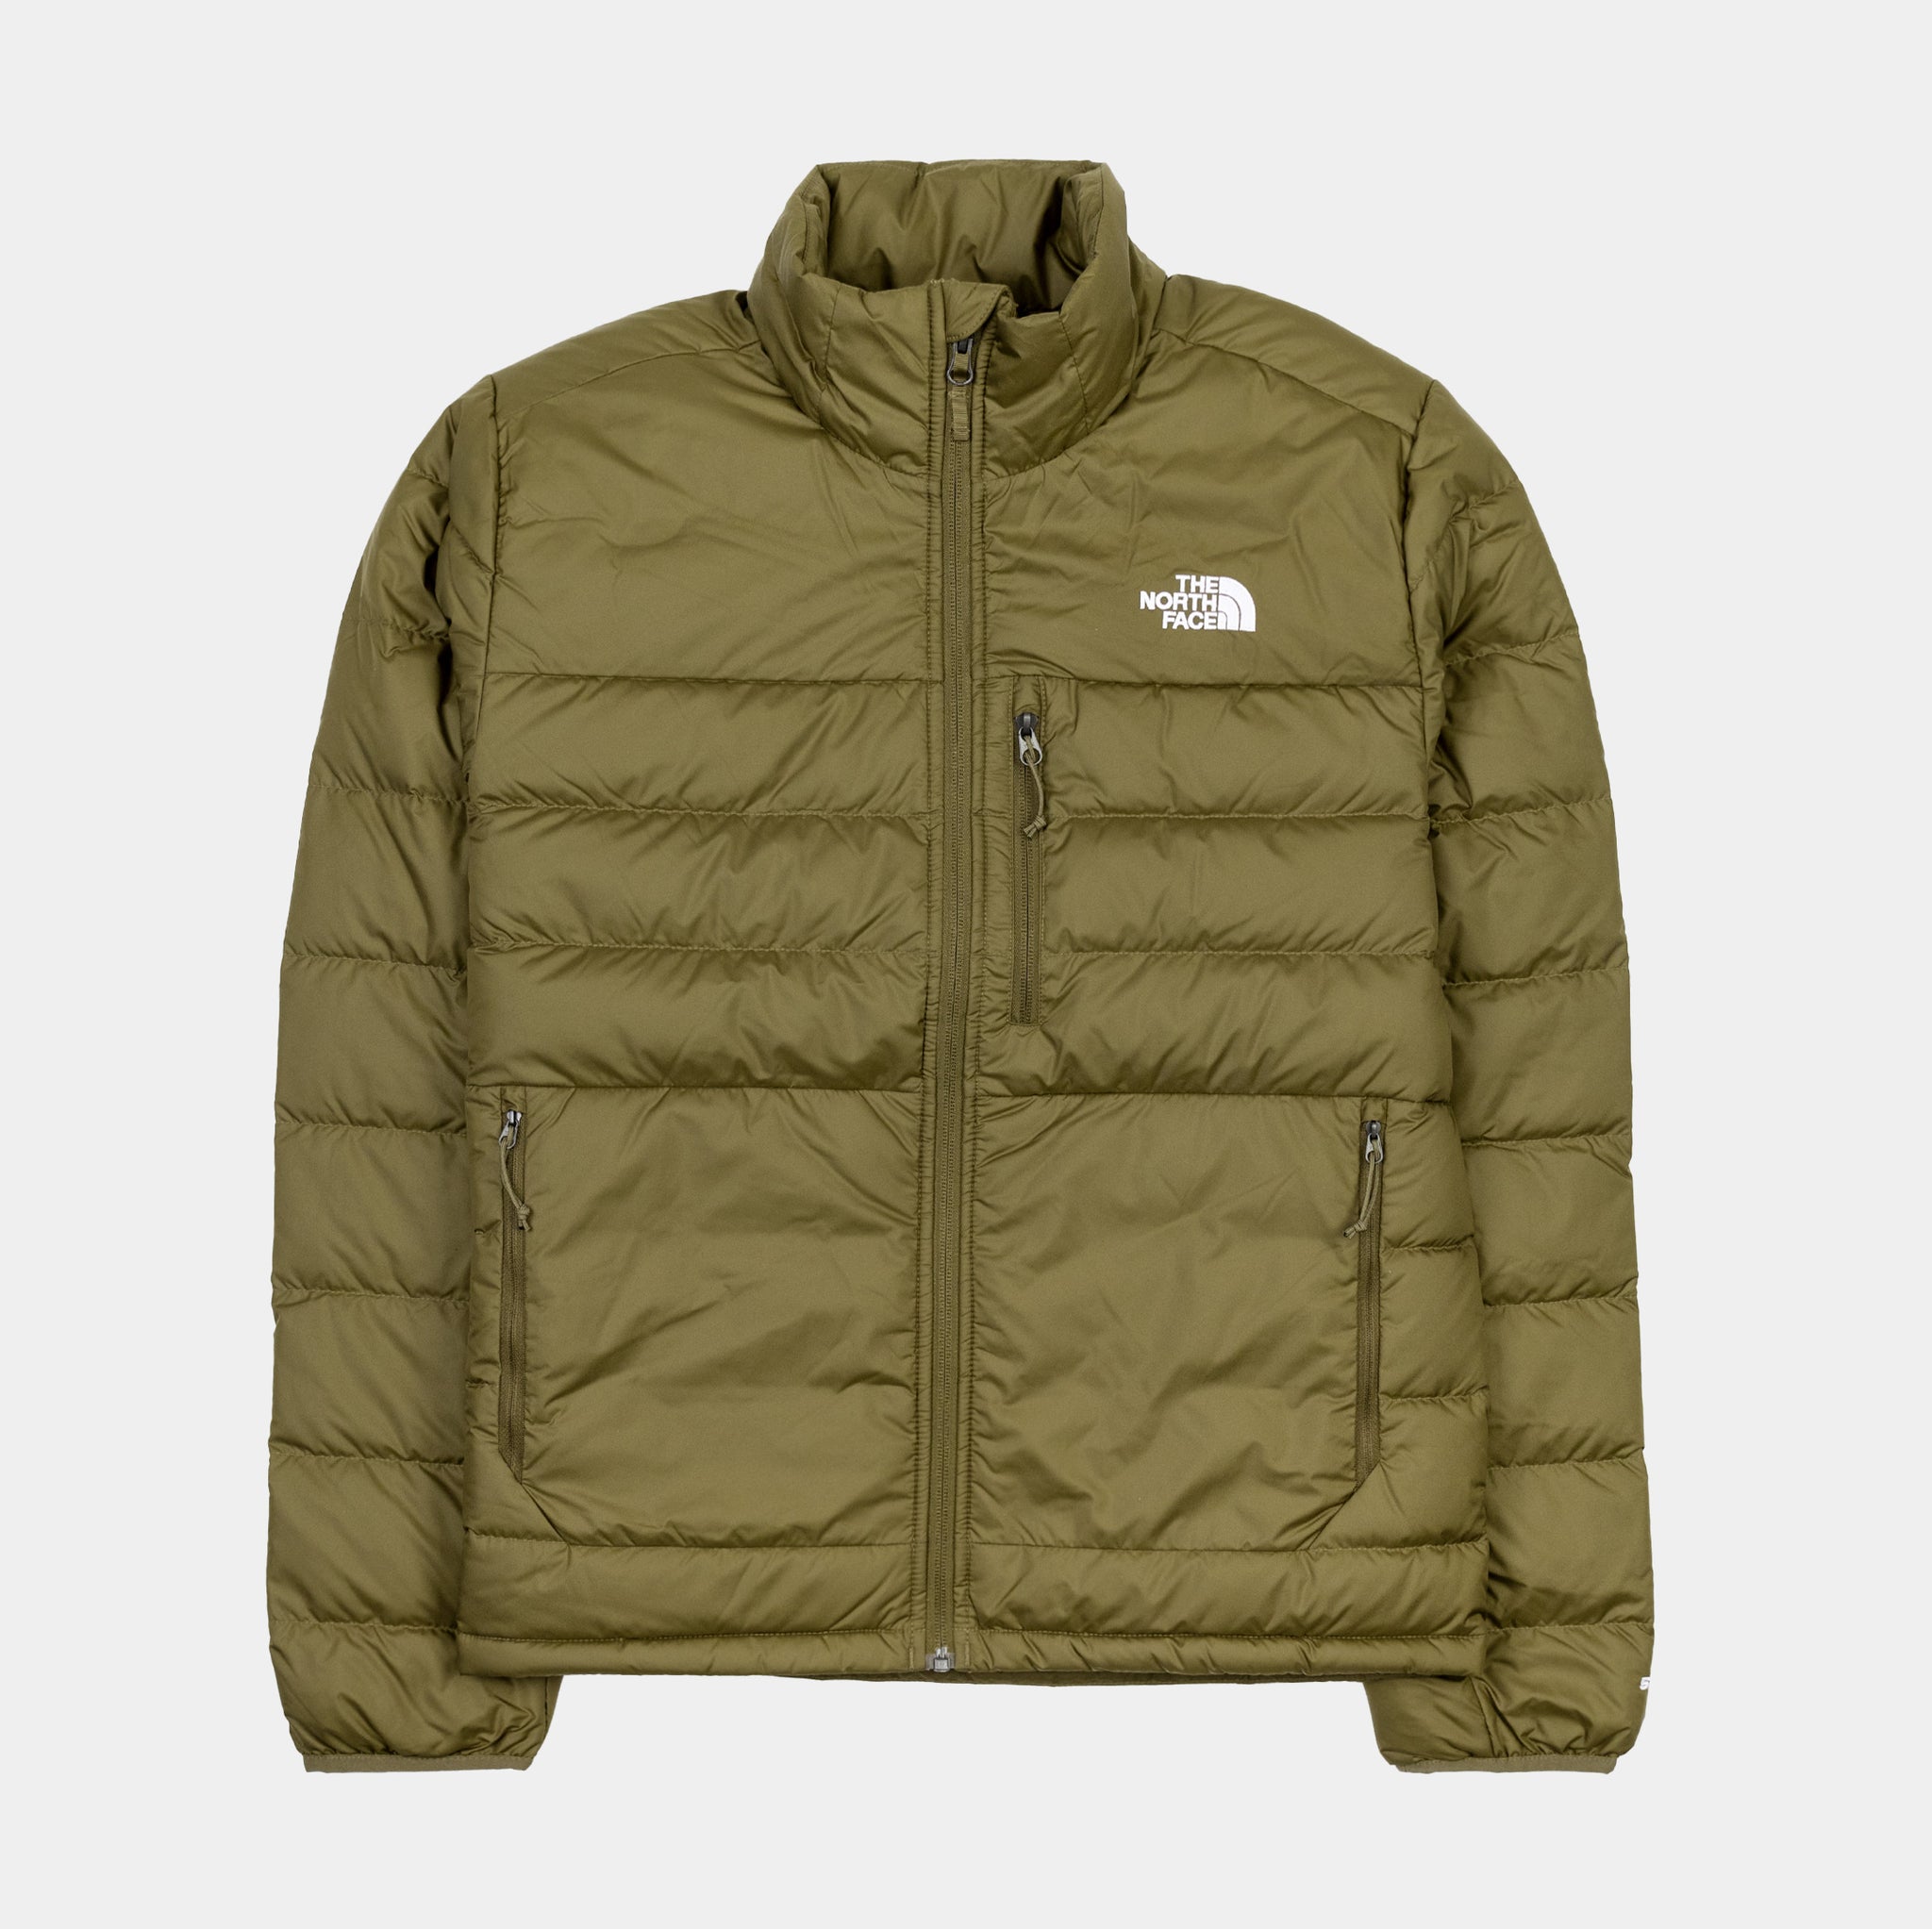 The North Face Aconcagua 2 Mens Jacket Green NF0A4R29-37U – Shoe Palace